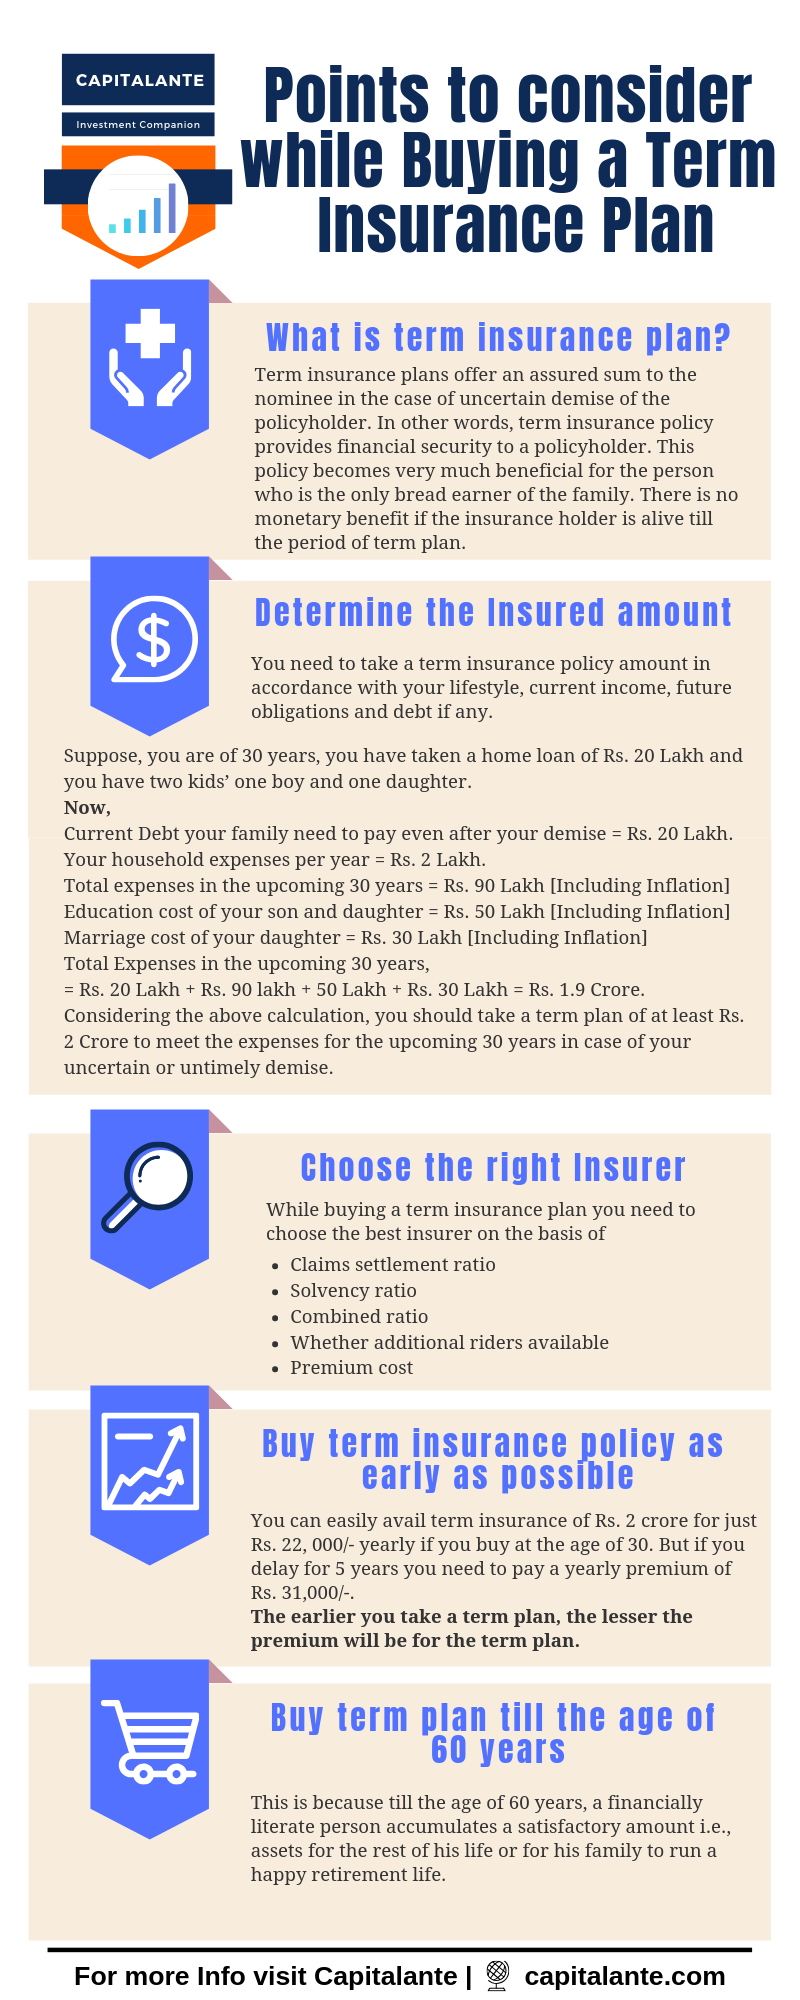 Points to consider while buying a Term insurance Plan